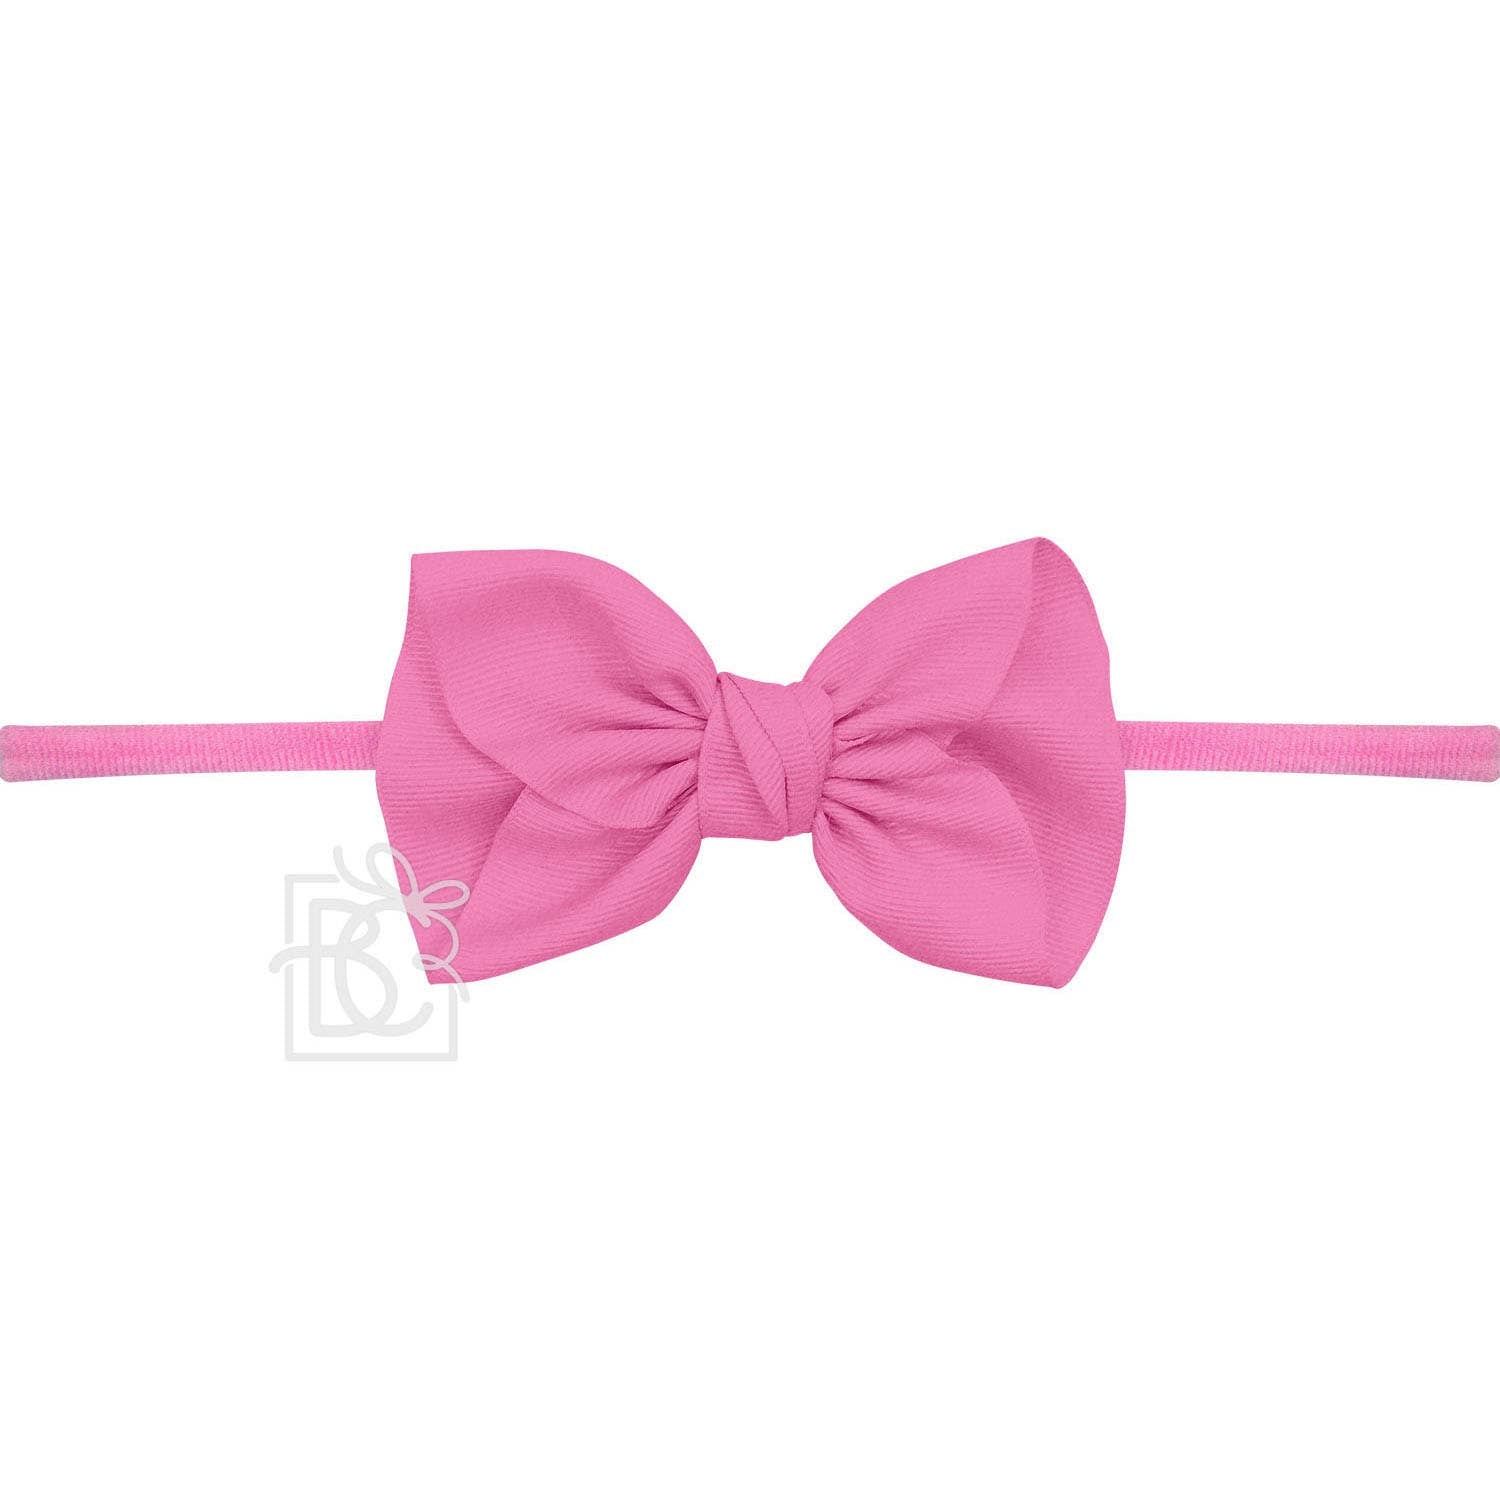 Anne Hot Pink Headband with Grosgrain Bow